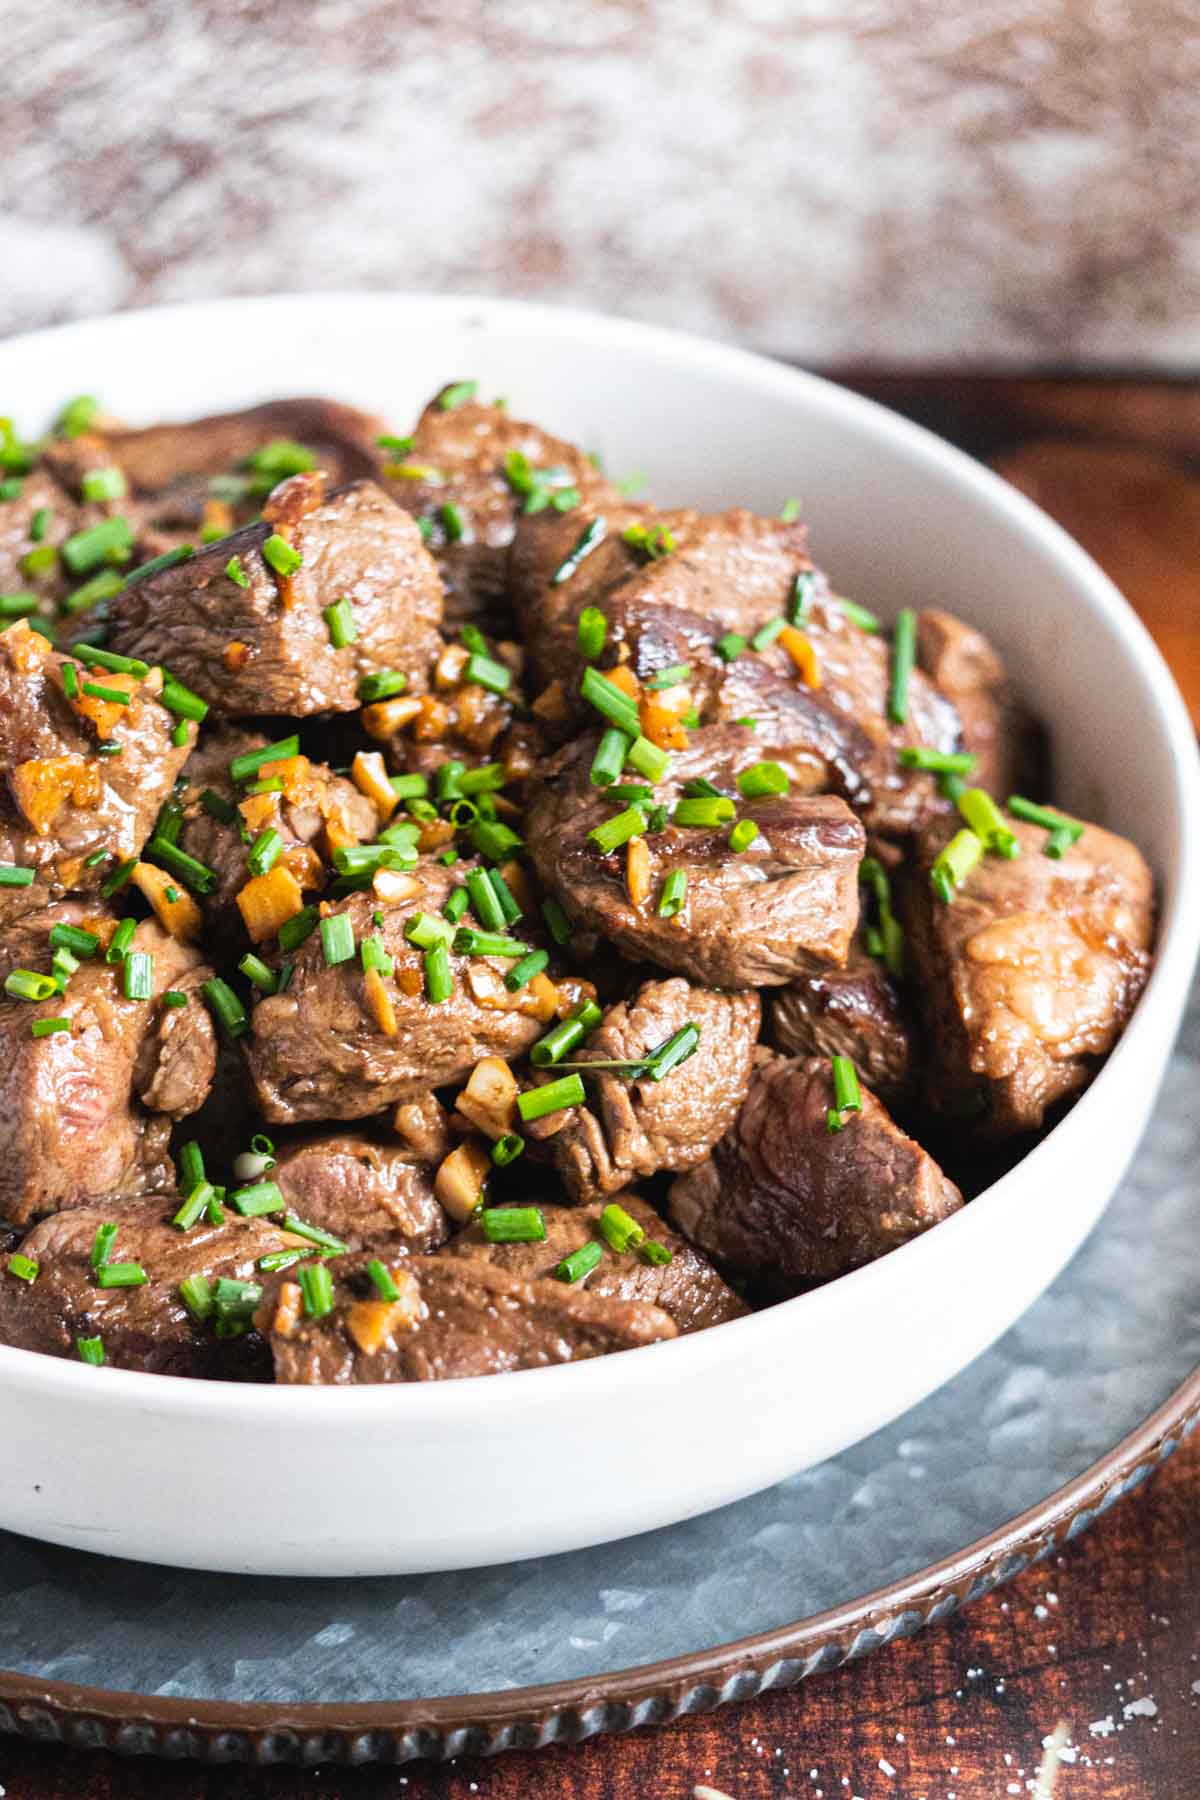 Steak bites with garlic and chives in a serving bowl.